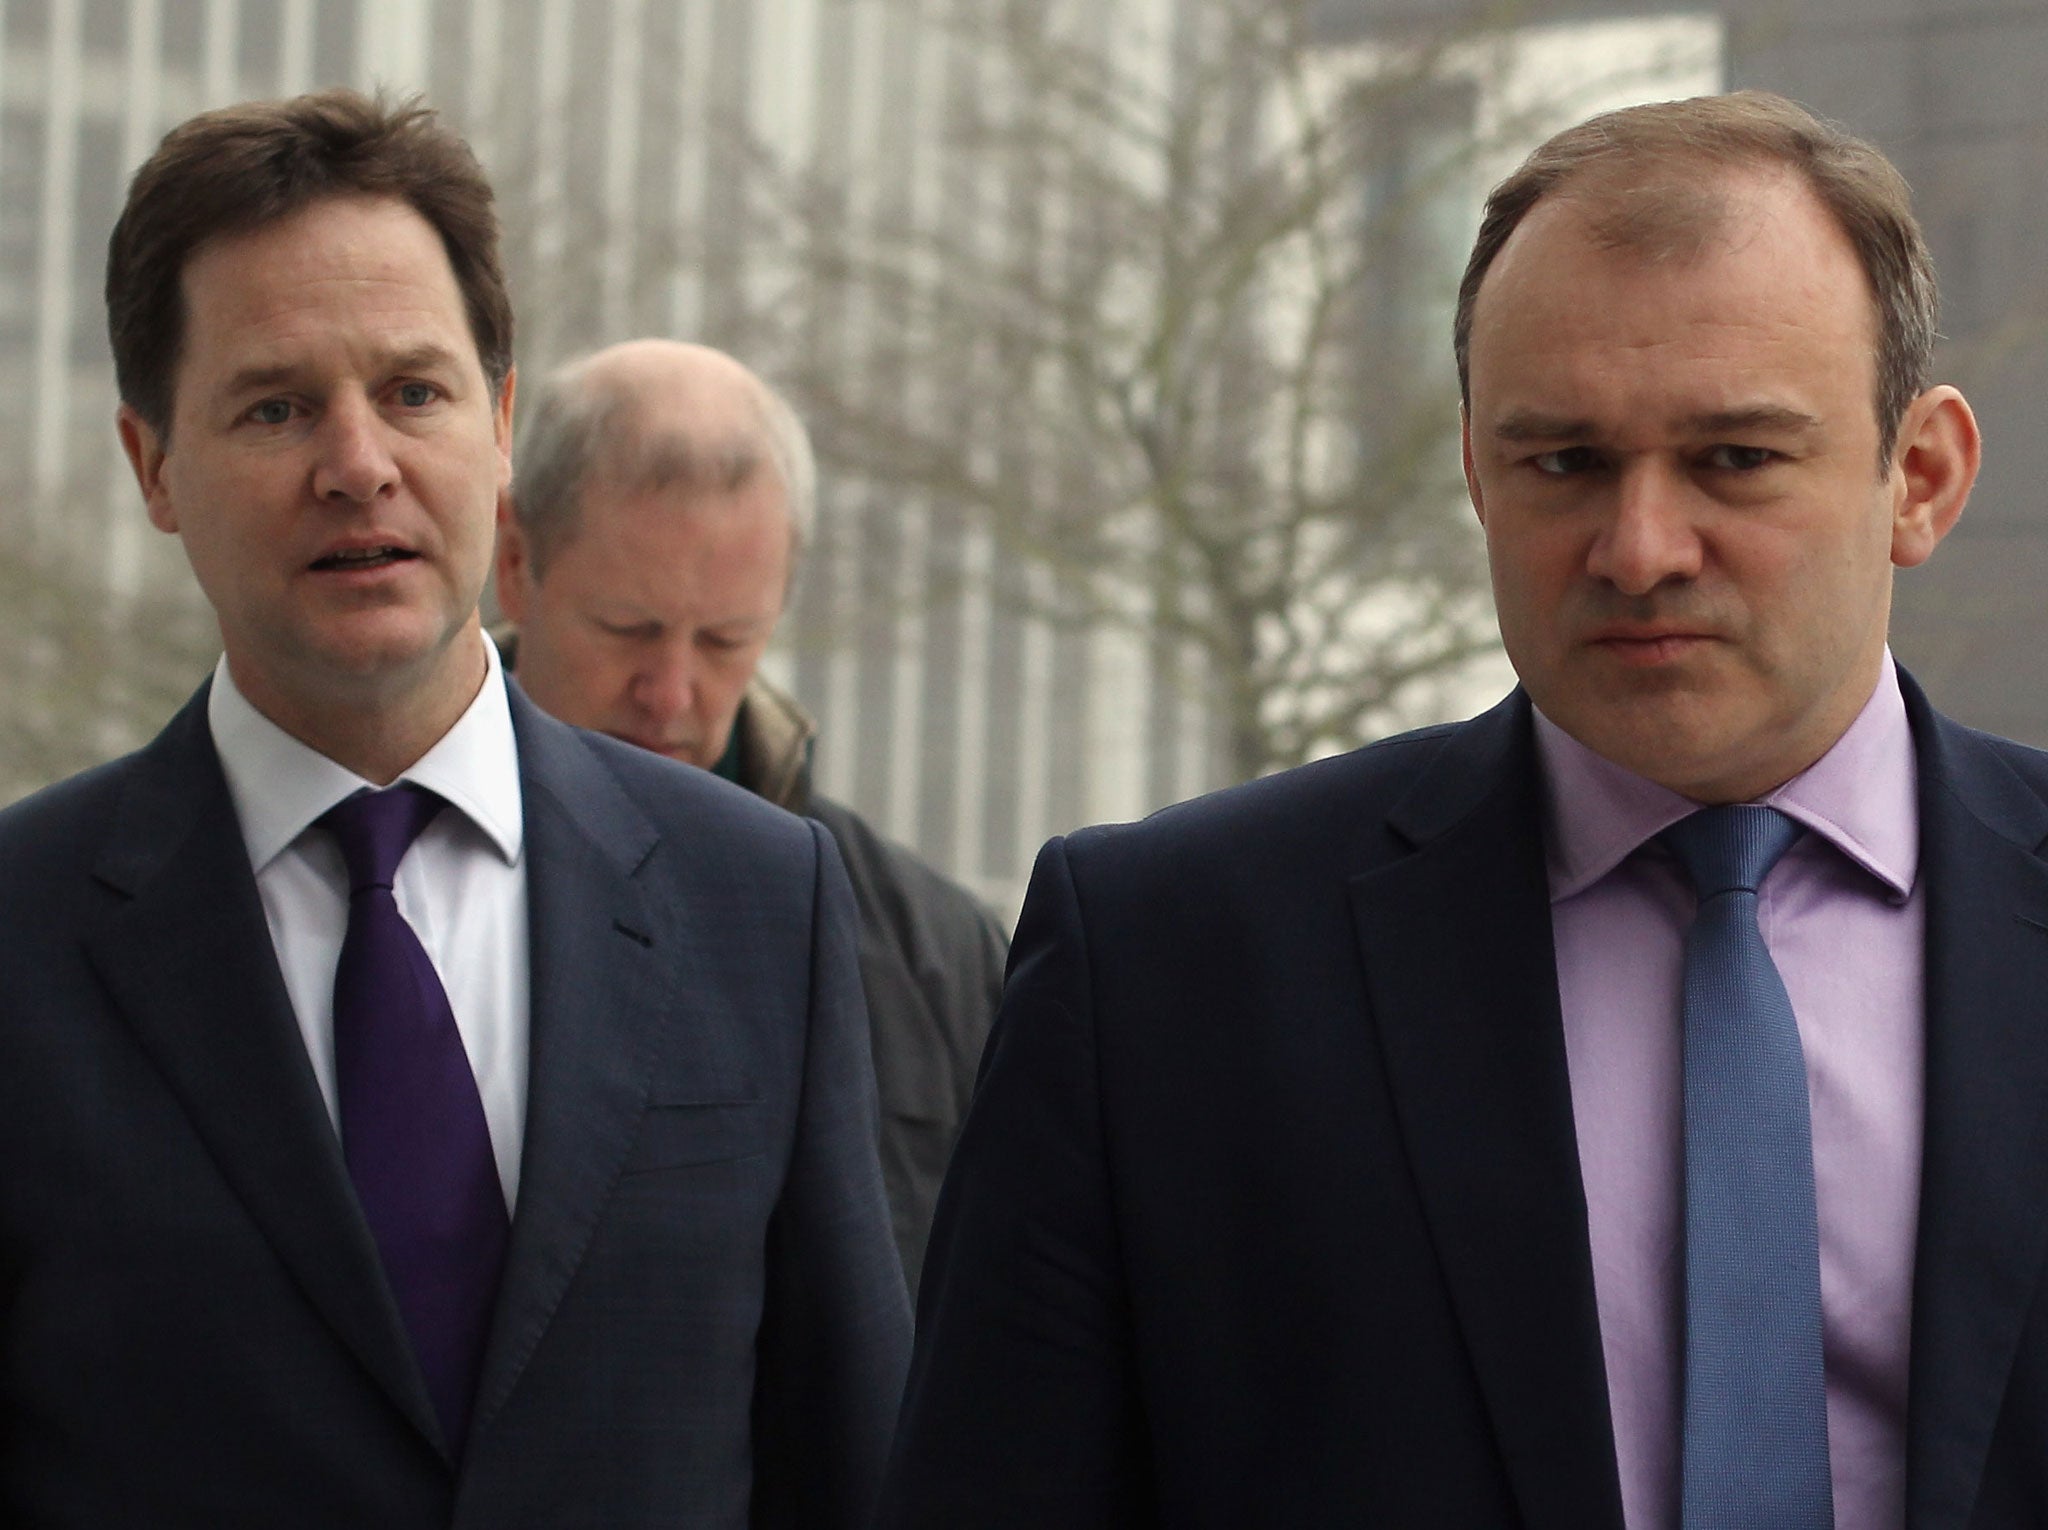 Deputy Prime Minister Nick Clegg (L) and the newly appointed energy secretary Ed Davey (R) visit BRE (Building Research Establishment) on February 6, 2012 in Watford, England.